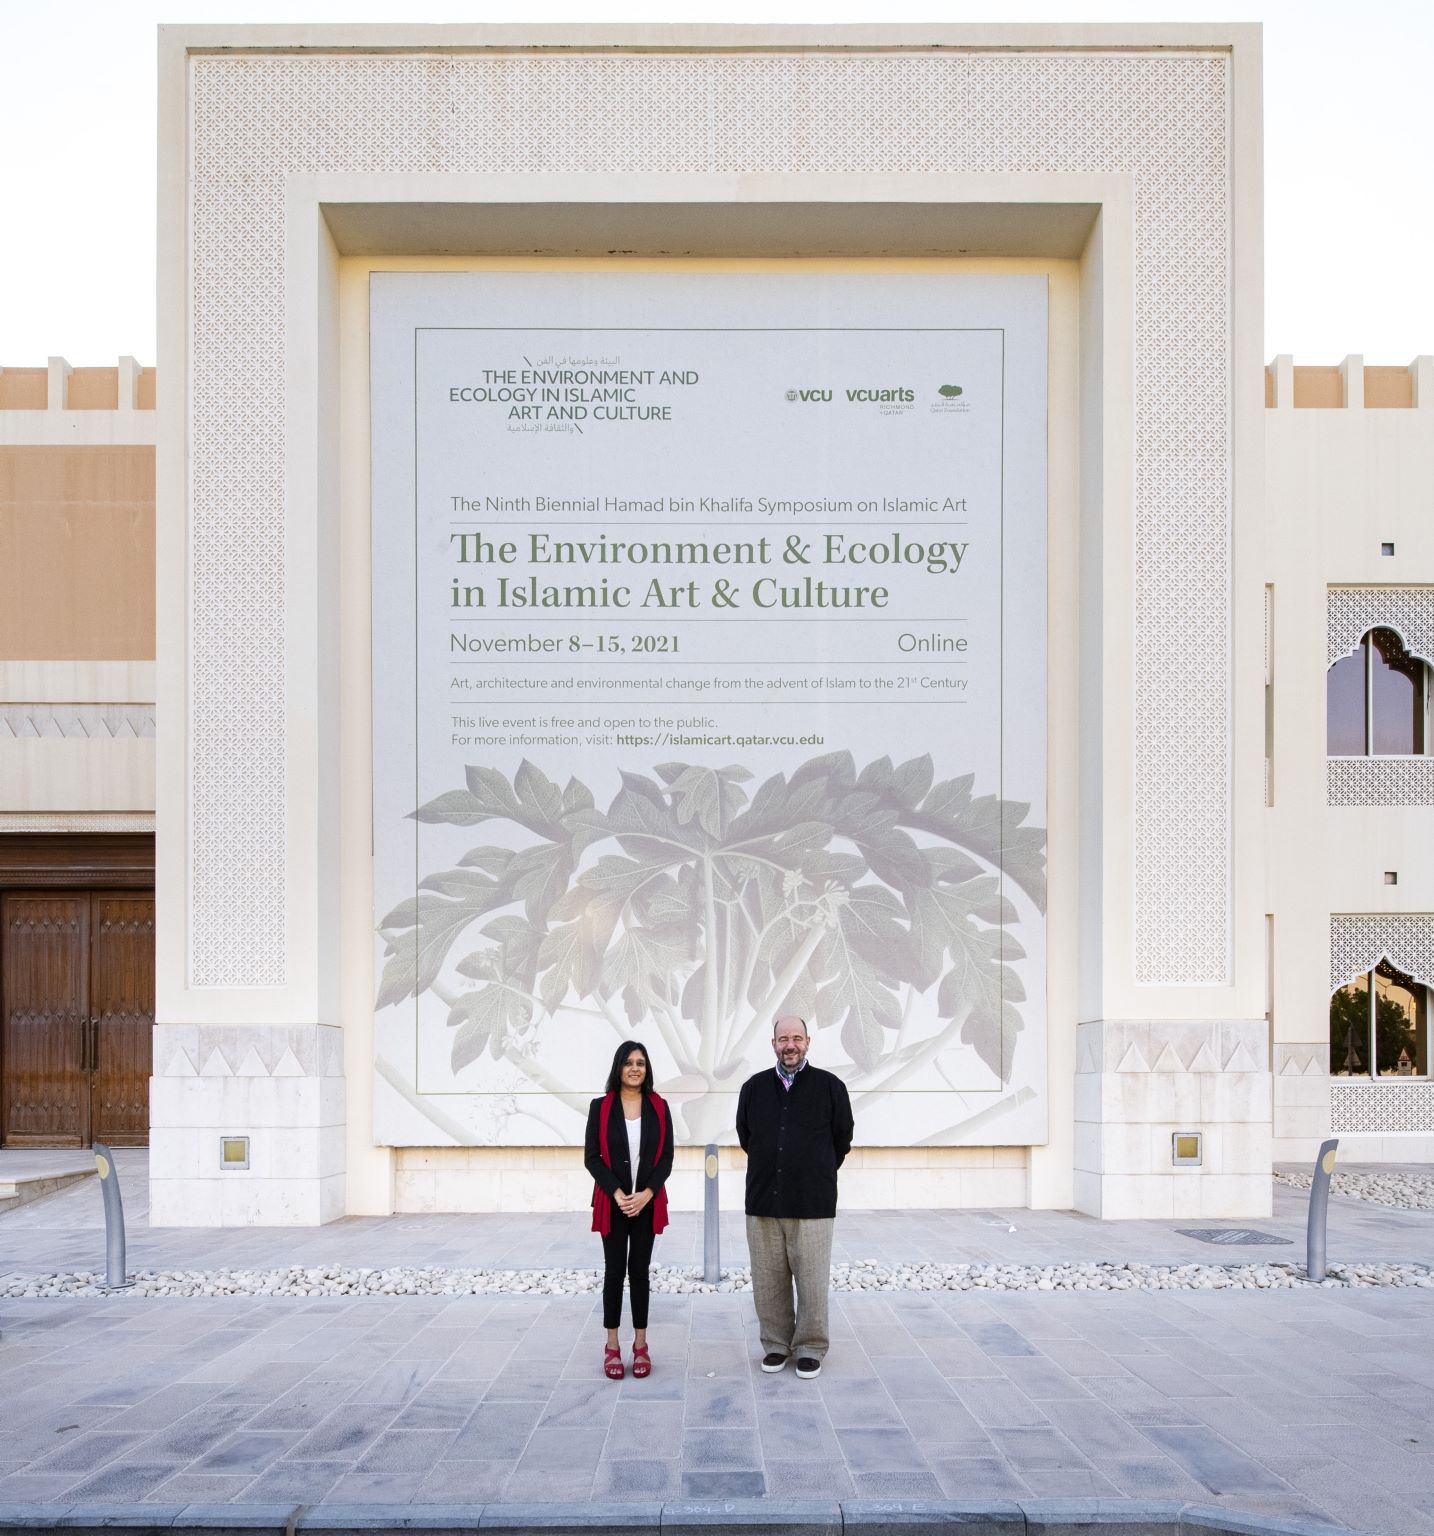 Radha Dalal and Jochen Sokoly standing in front of the branding for The Environment and Ecology in Islamic Art and Culture which was held at V C U arts Qatar in 2021